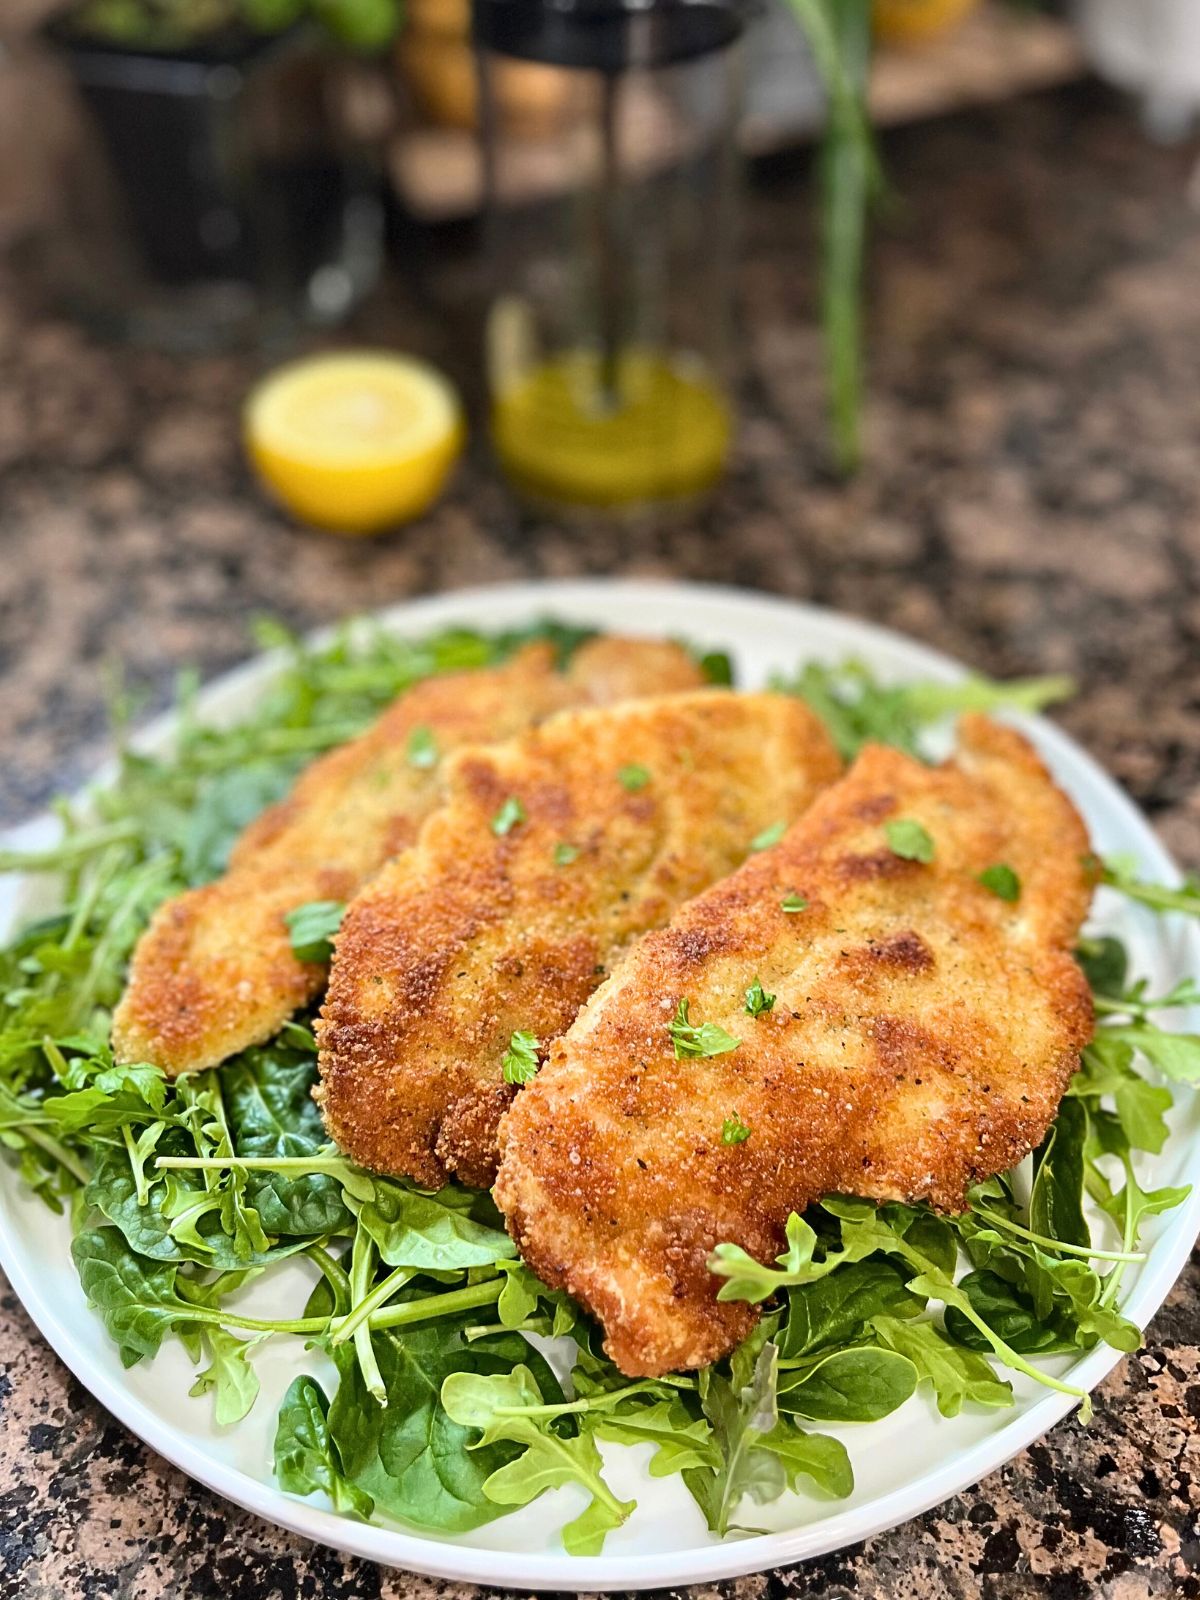 Three pieces of crispy chicken sitting on top of a plate of greens. There is chopped parsley sprinkled on top of the chicken.